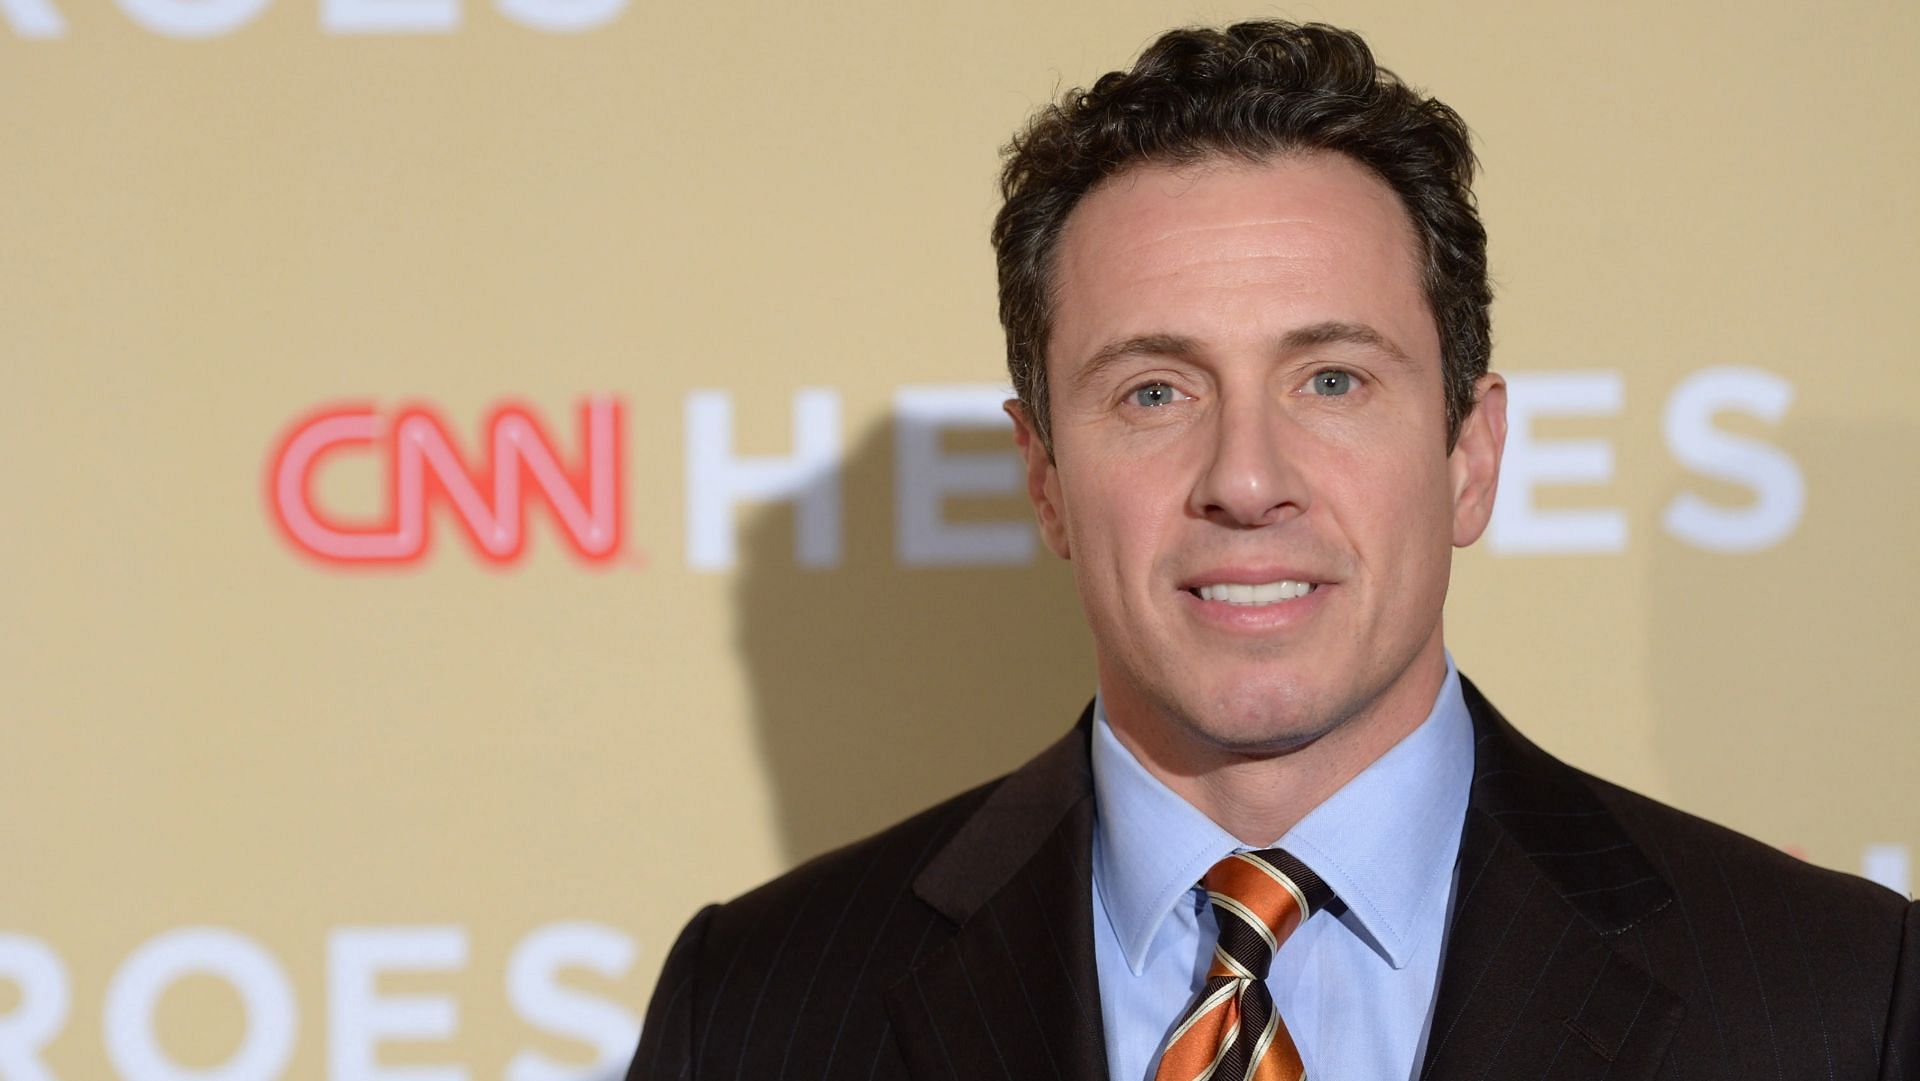 Chris Cuomo was fired from CNN in December 2021. (Image via Dimitrios Kambouris/Getty)